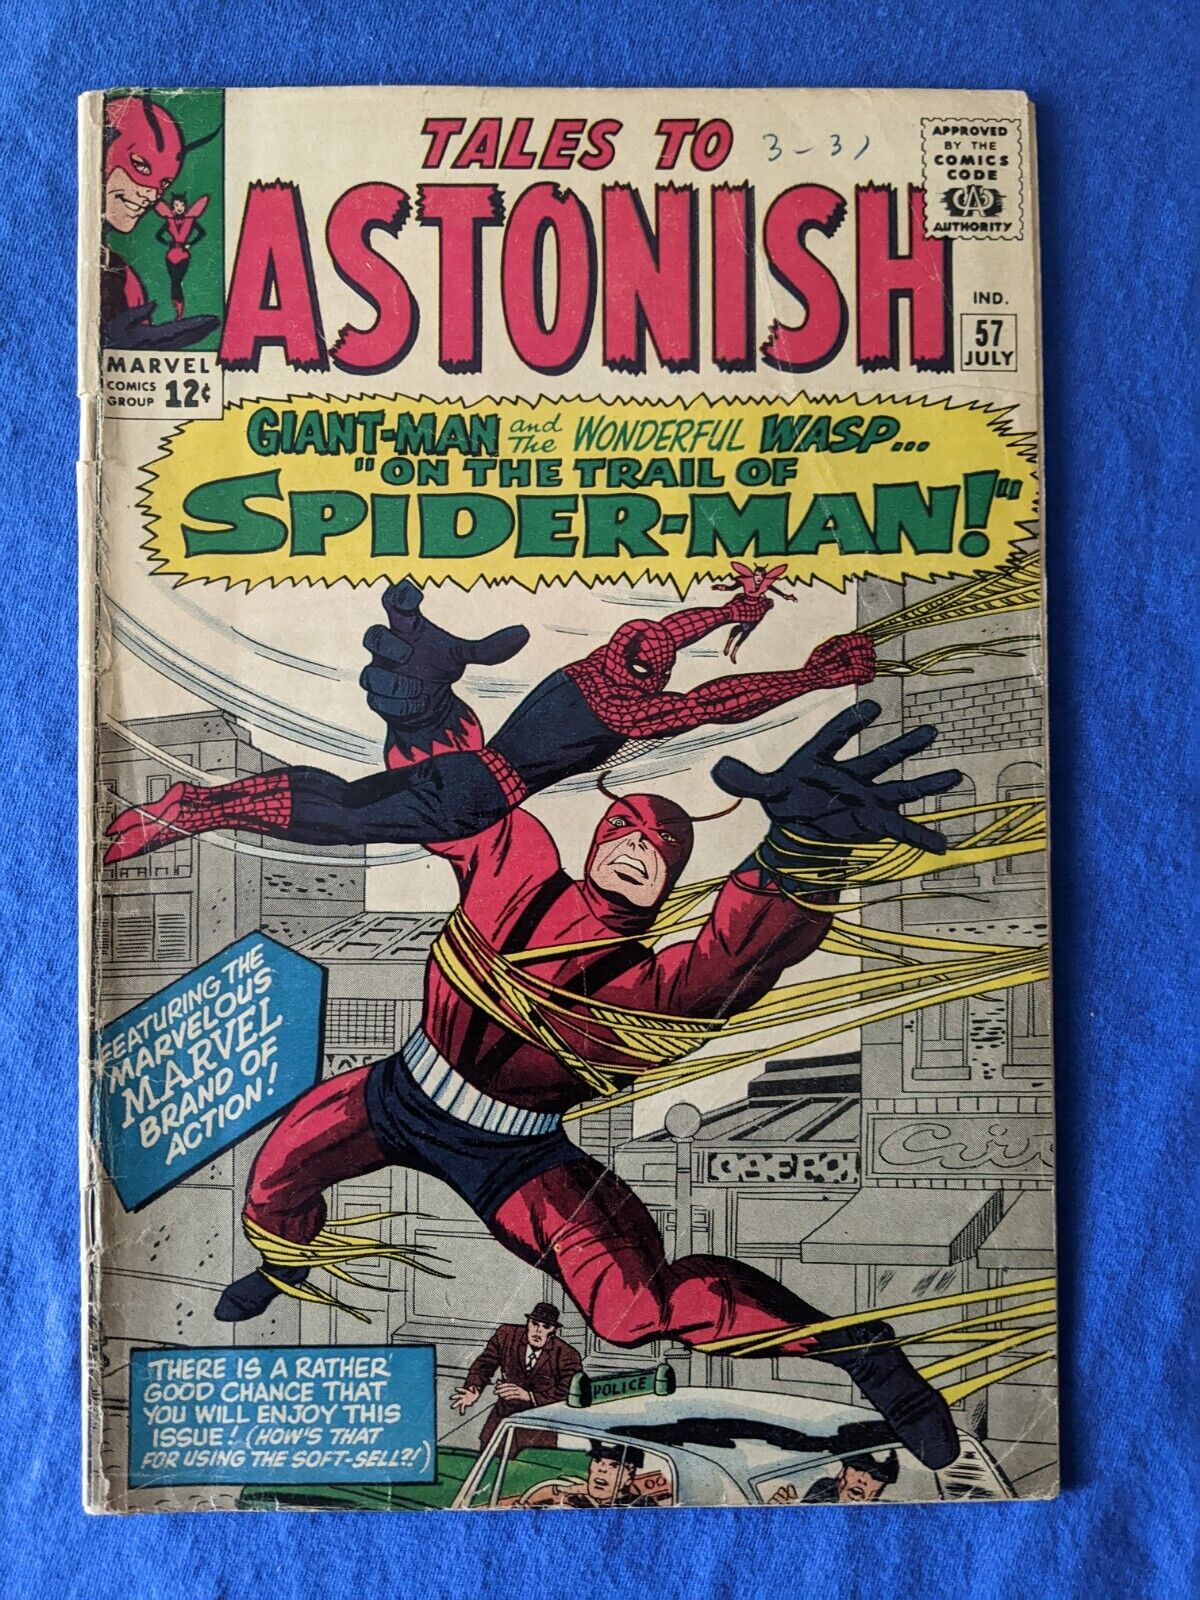 TALES TO ASTONISH #57 (July 1964) Marvel Silver age, early Spider-Man crossover